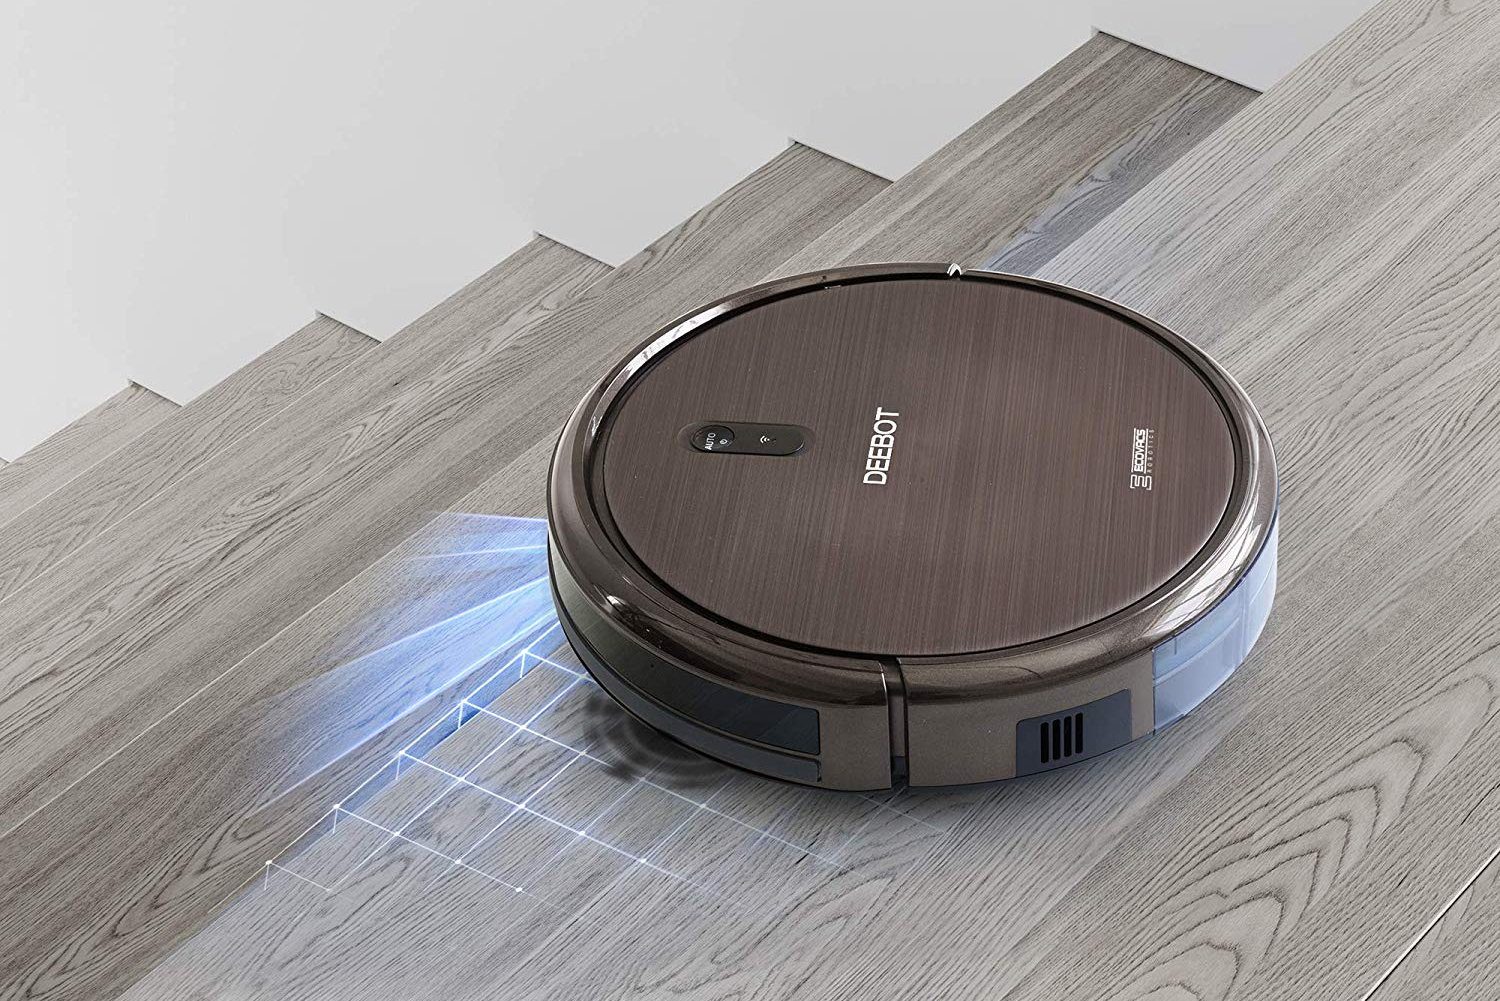 amazon 24 hour deal best price ever on ecovacs deebot n79s robot vac vacuum cleaner 4  1